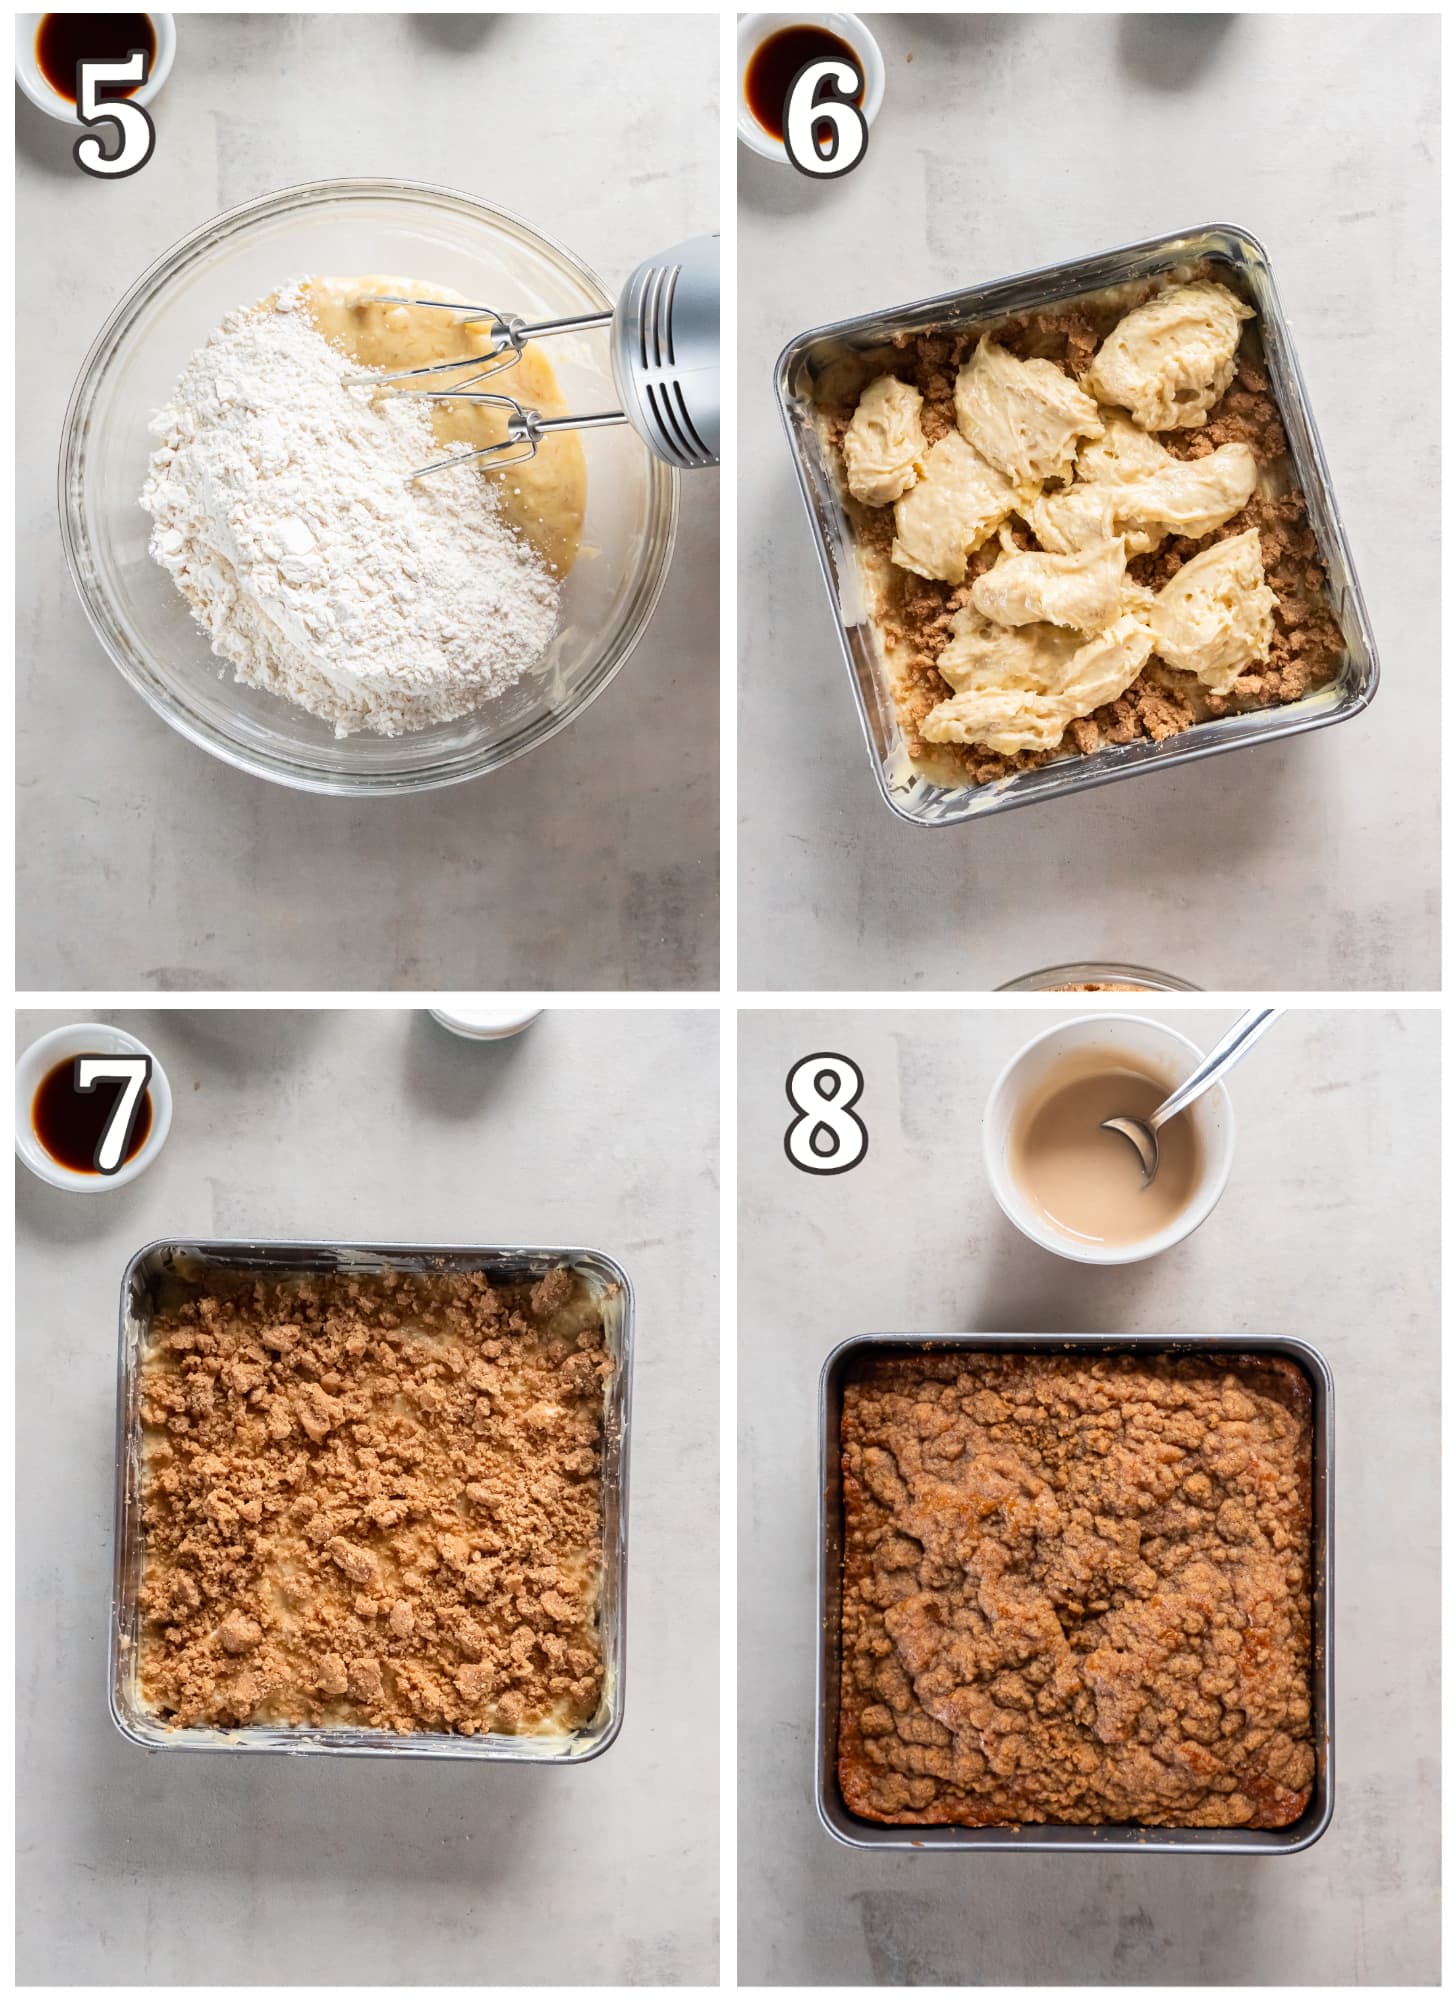 photo collage demonstrating how to make banana coffee cake in an 8x8 baking pan.